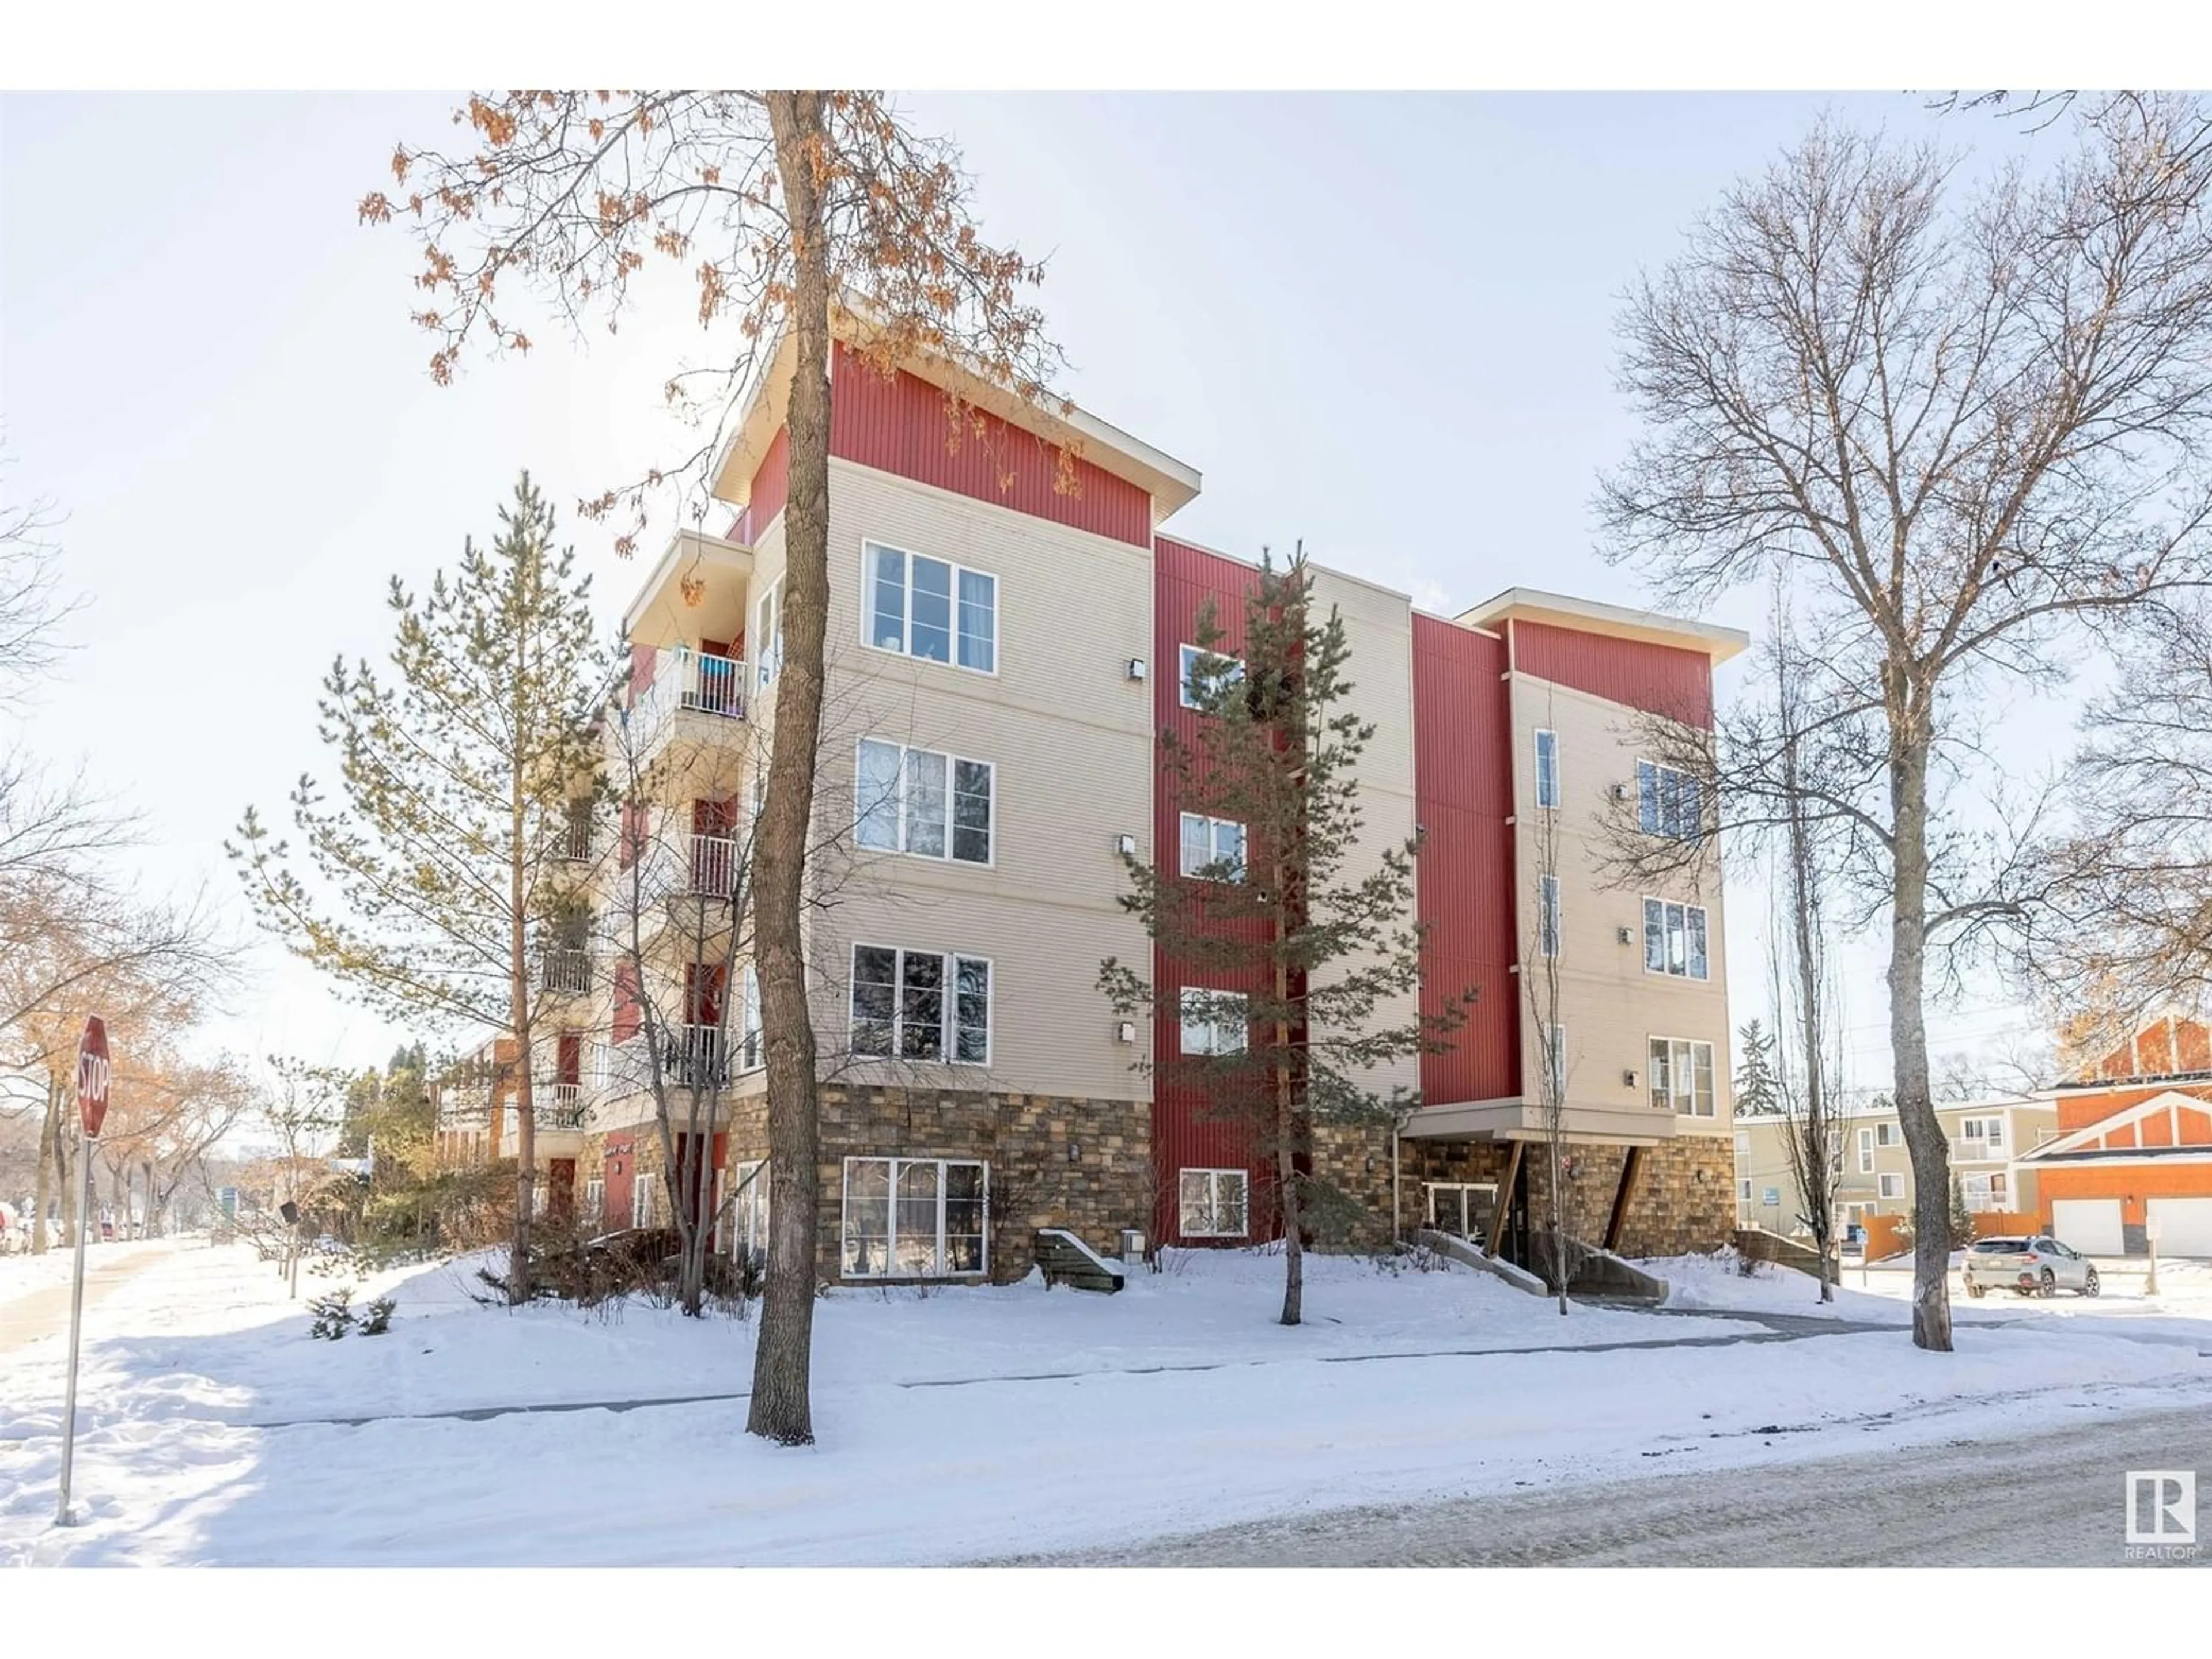 A pic from exterior of the house or condo for #401 11107 108 AV NW, Edmonton Alberta T5H4J3